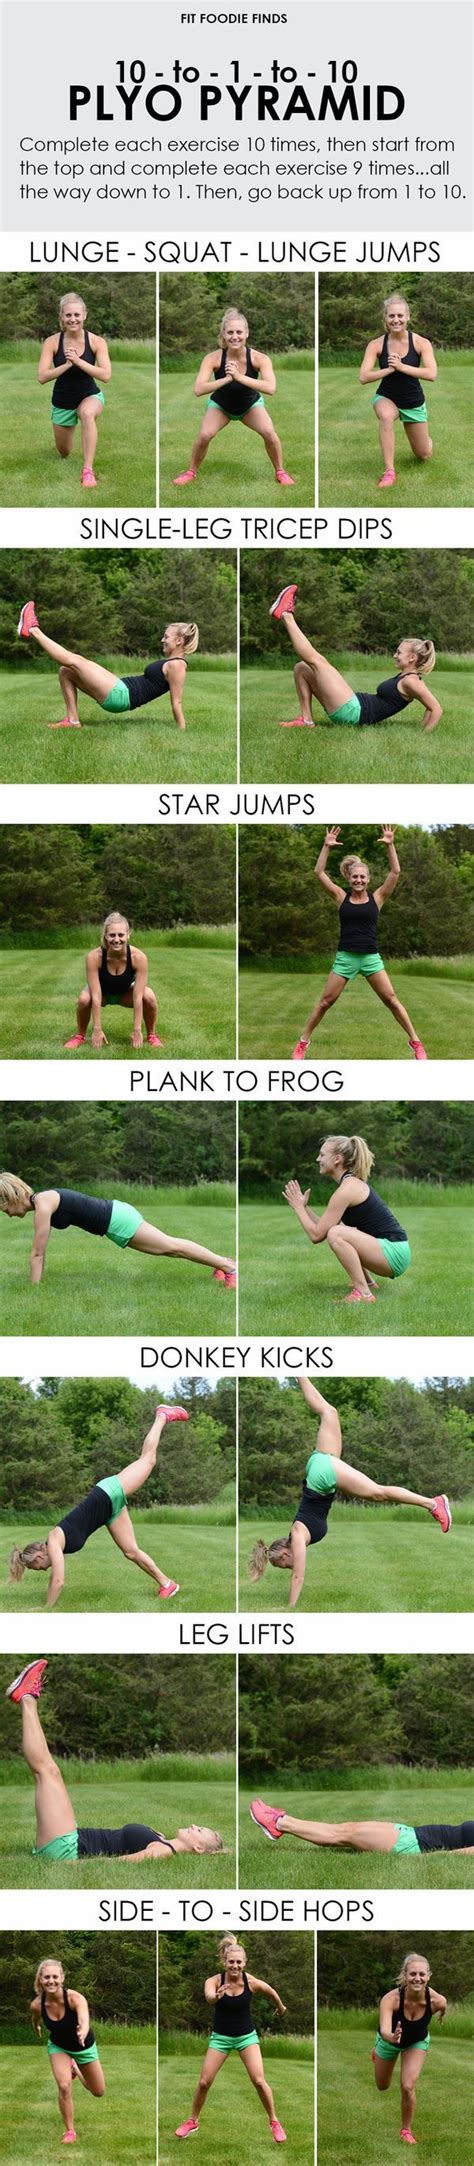 Take This Hiit Workout With You Anywhere Use Your Own Bodyweight And